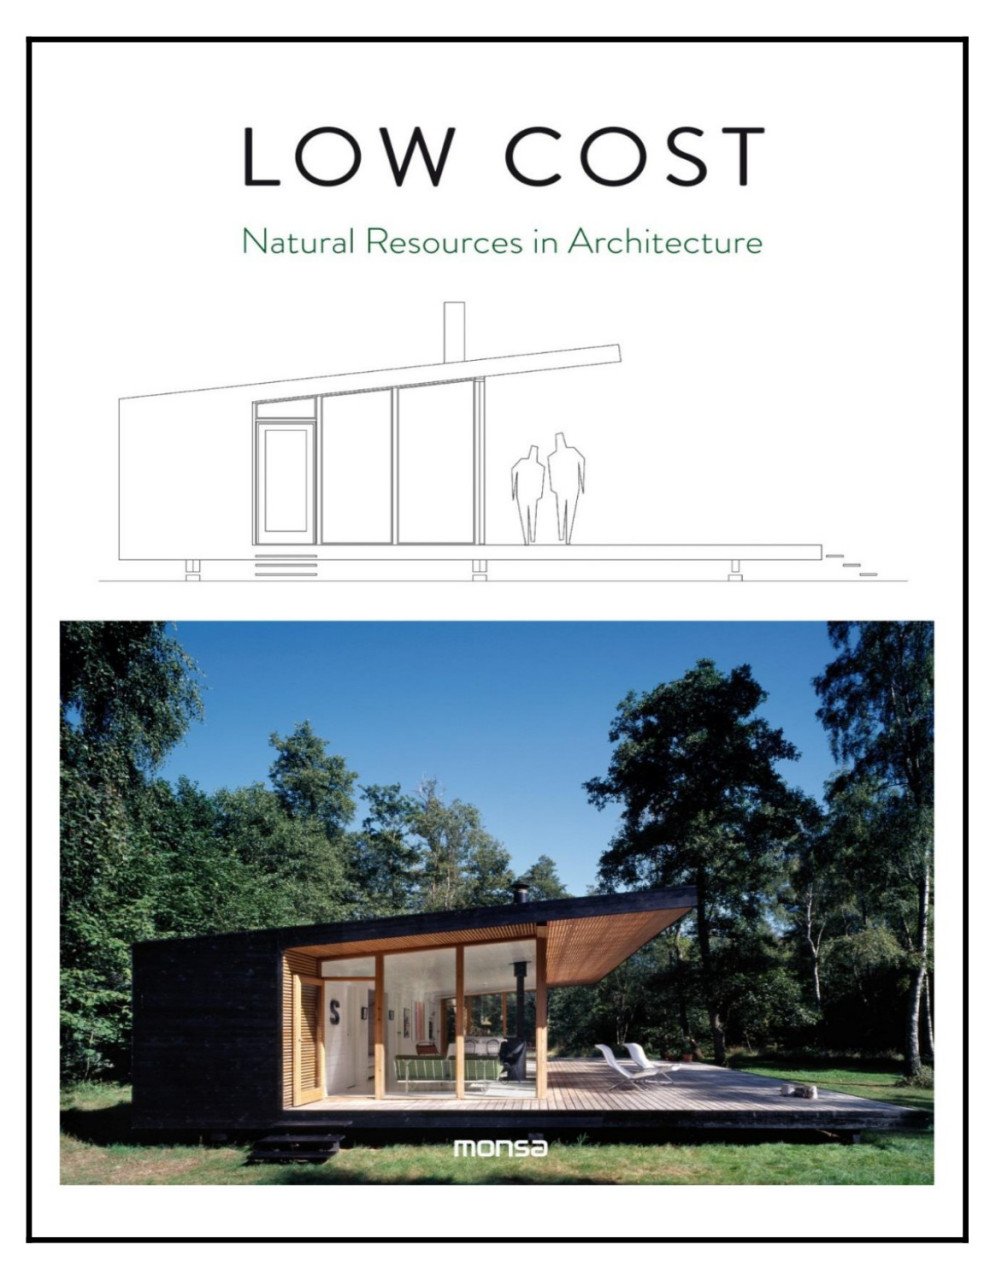 LOW COST- Natural Resources in Architecture